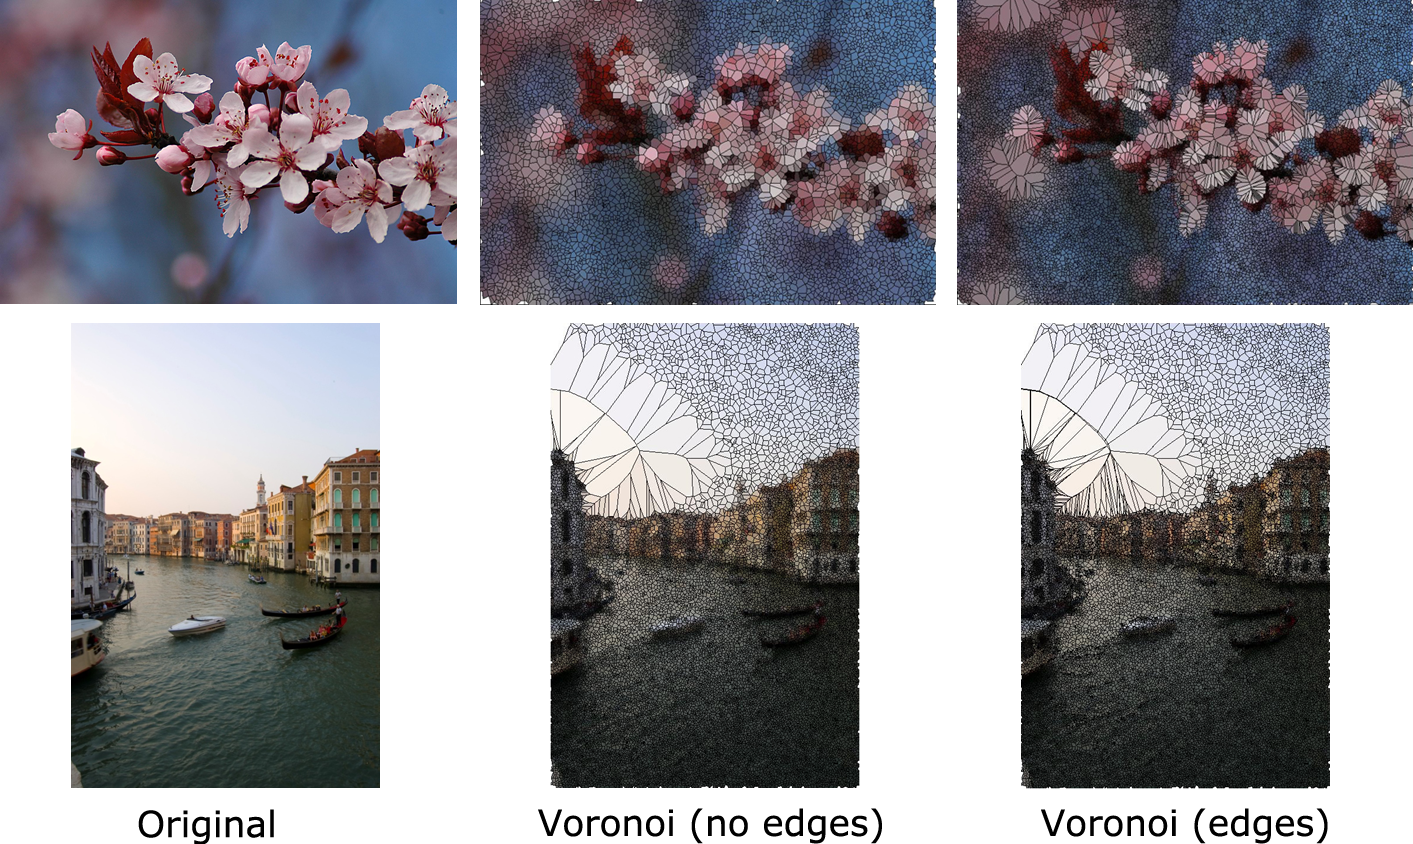 Voronoi art examples: cherry blossoms and Venetian canal